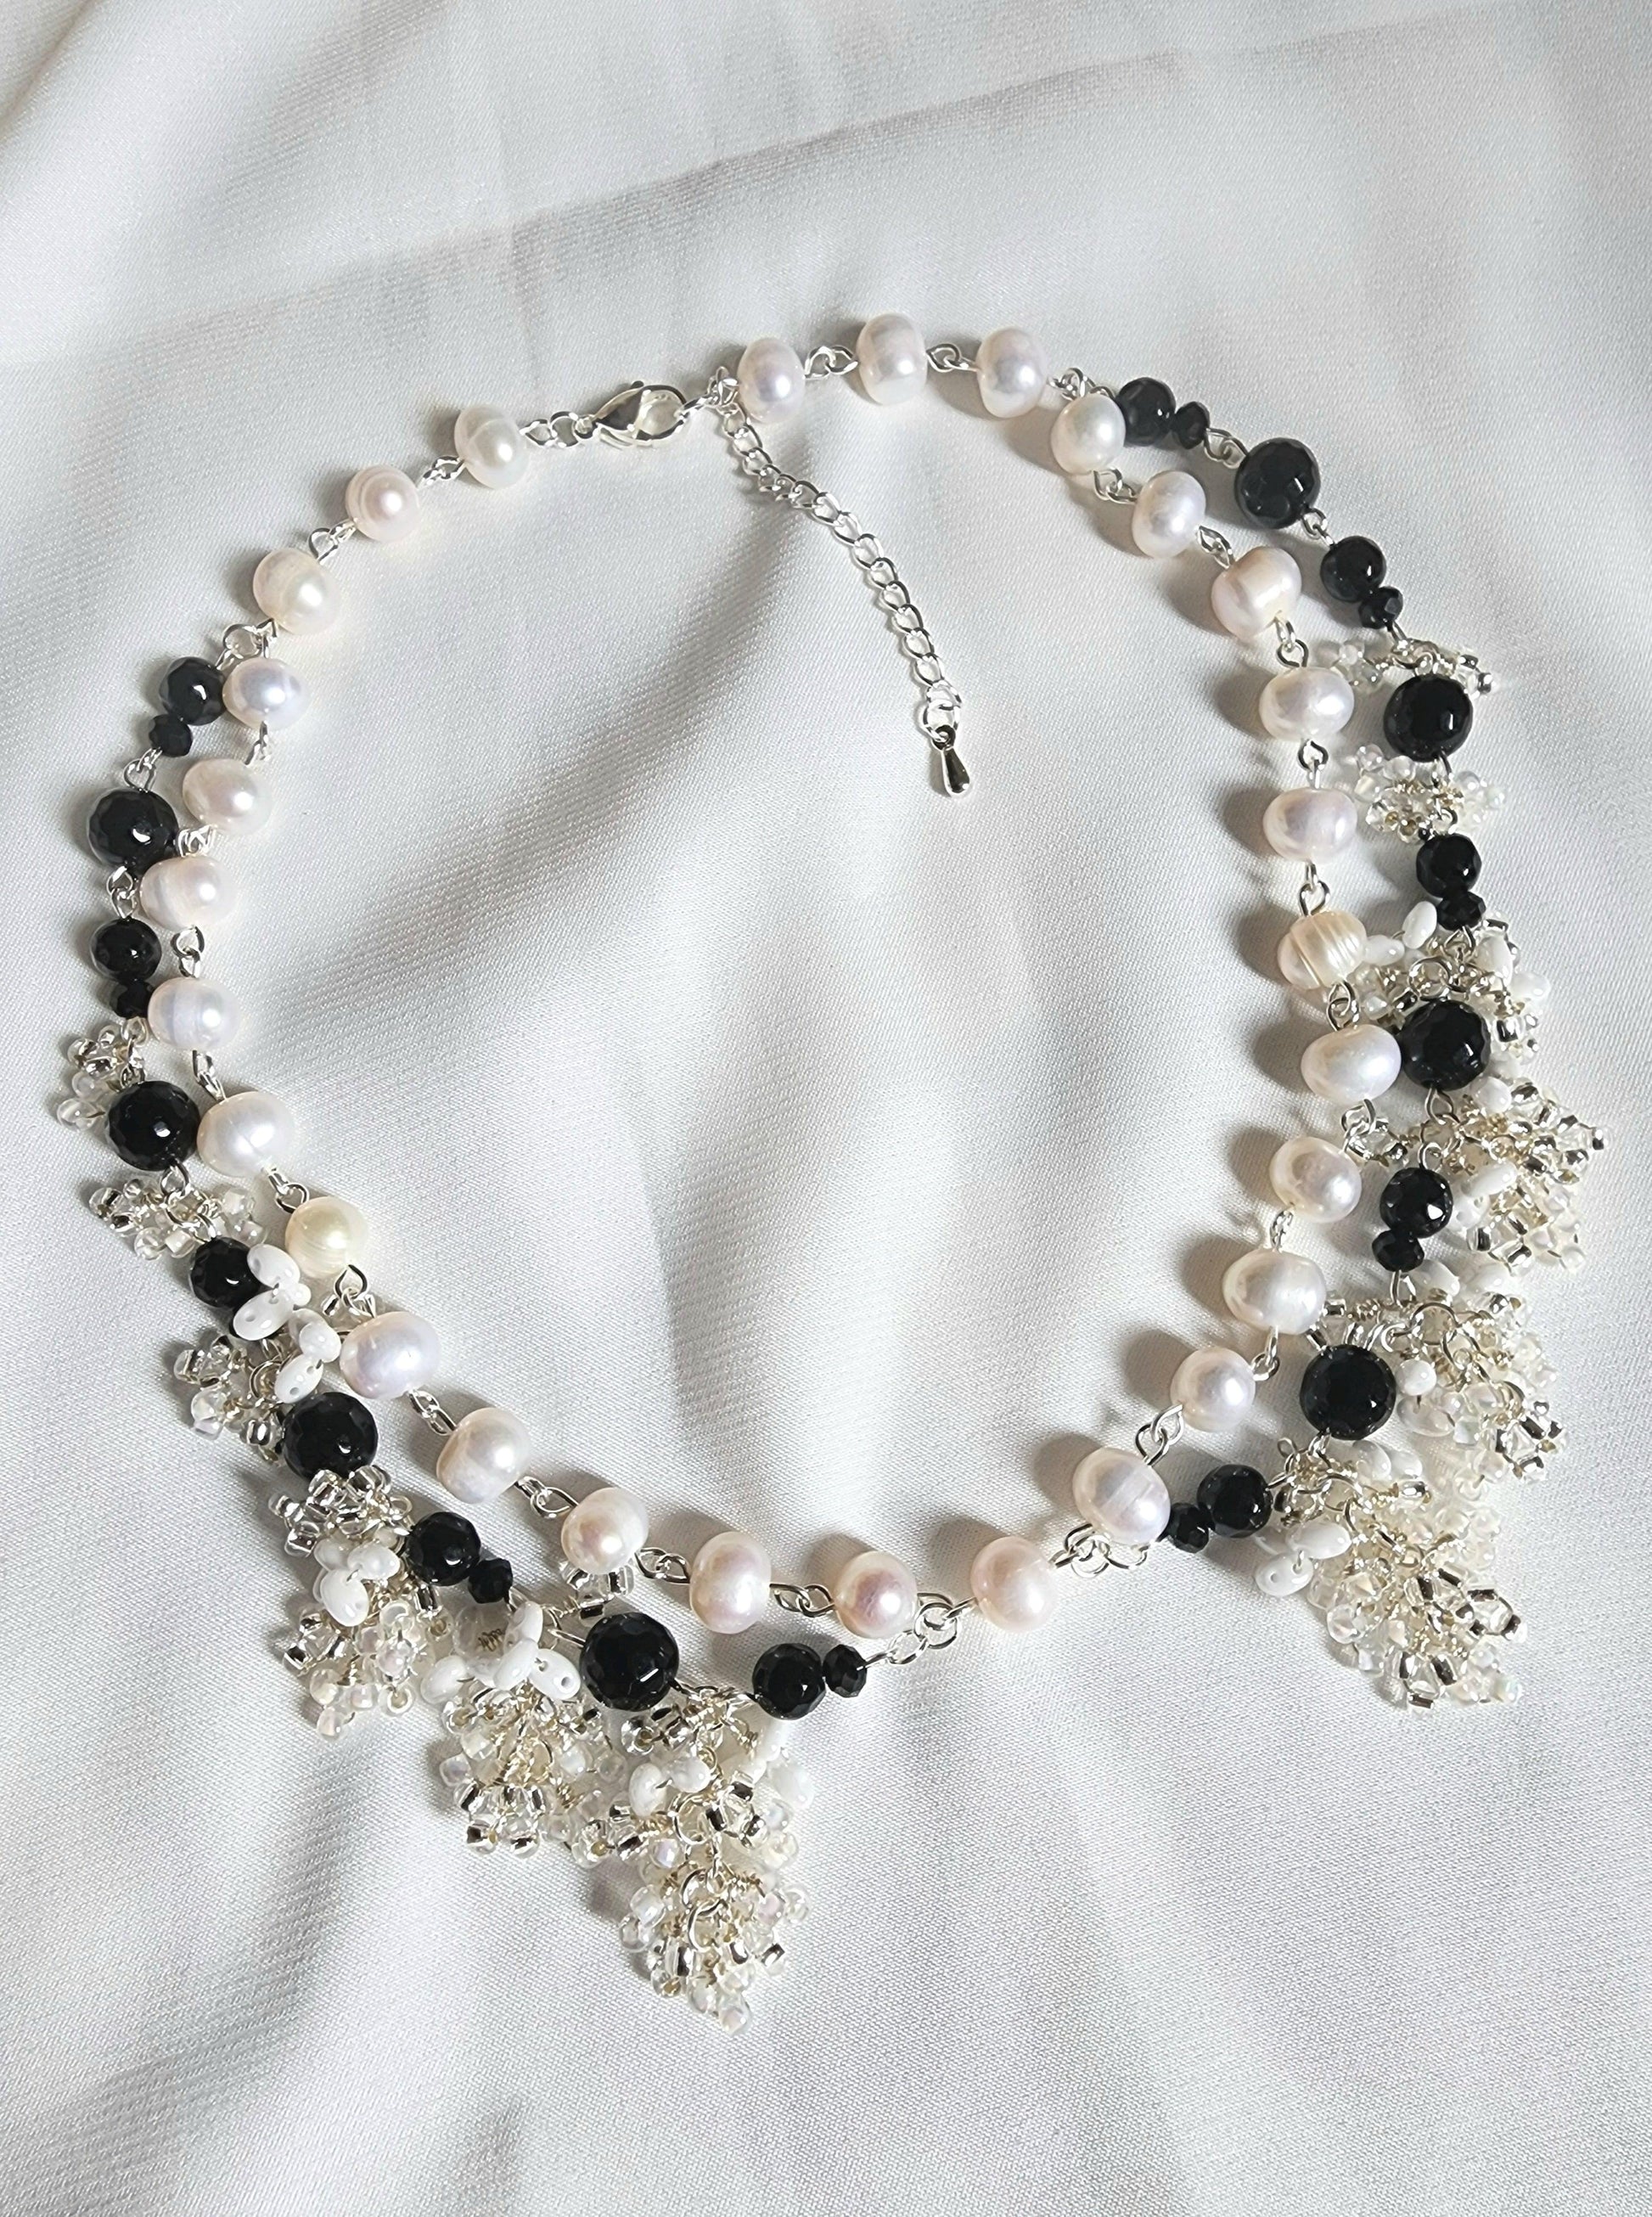 Black-White Collar Necklace - By Cocoyu